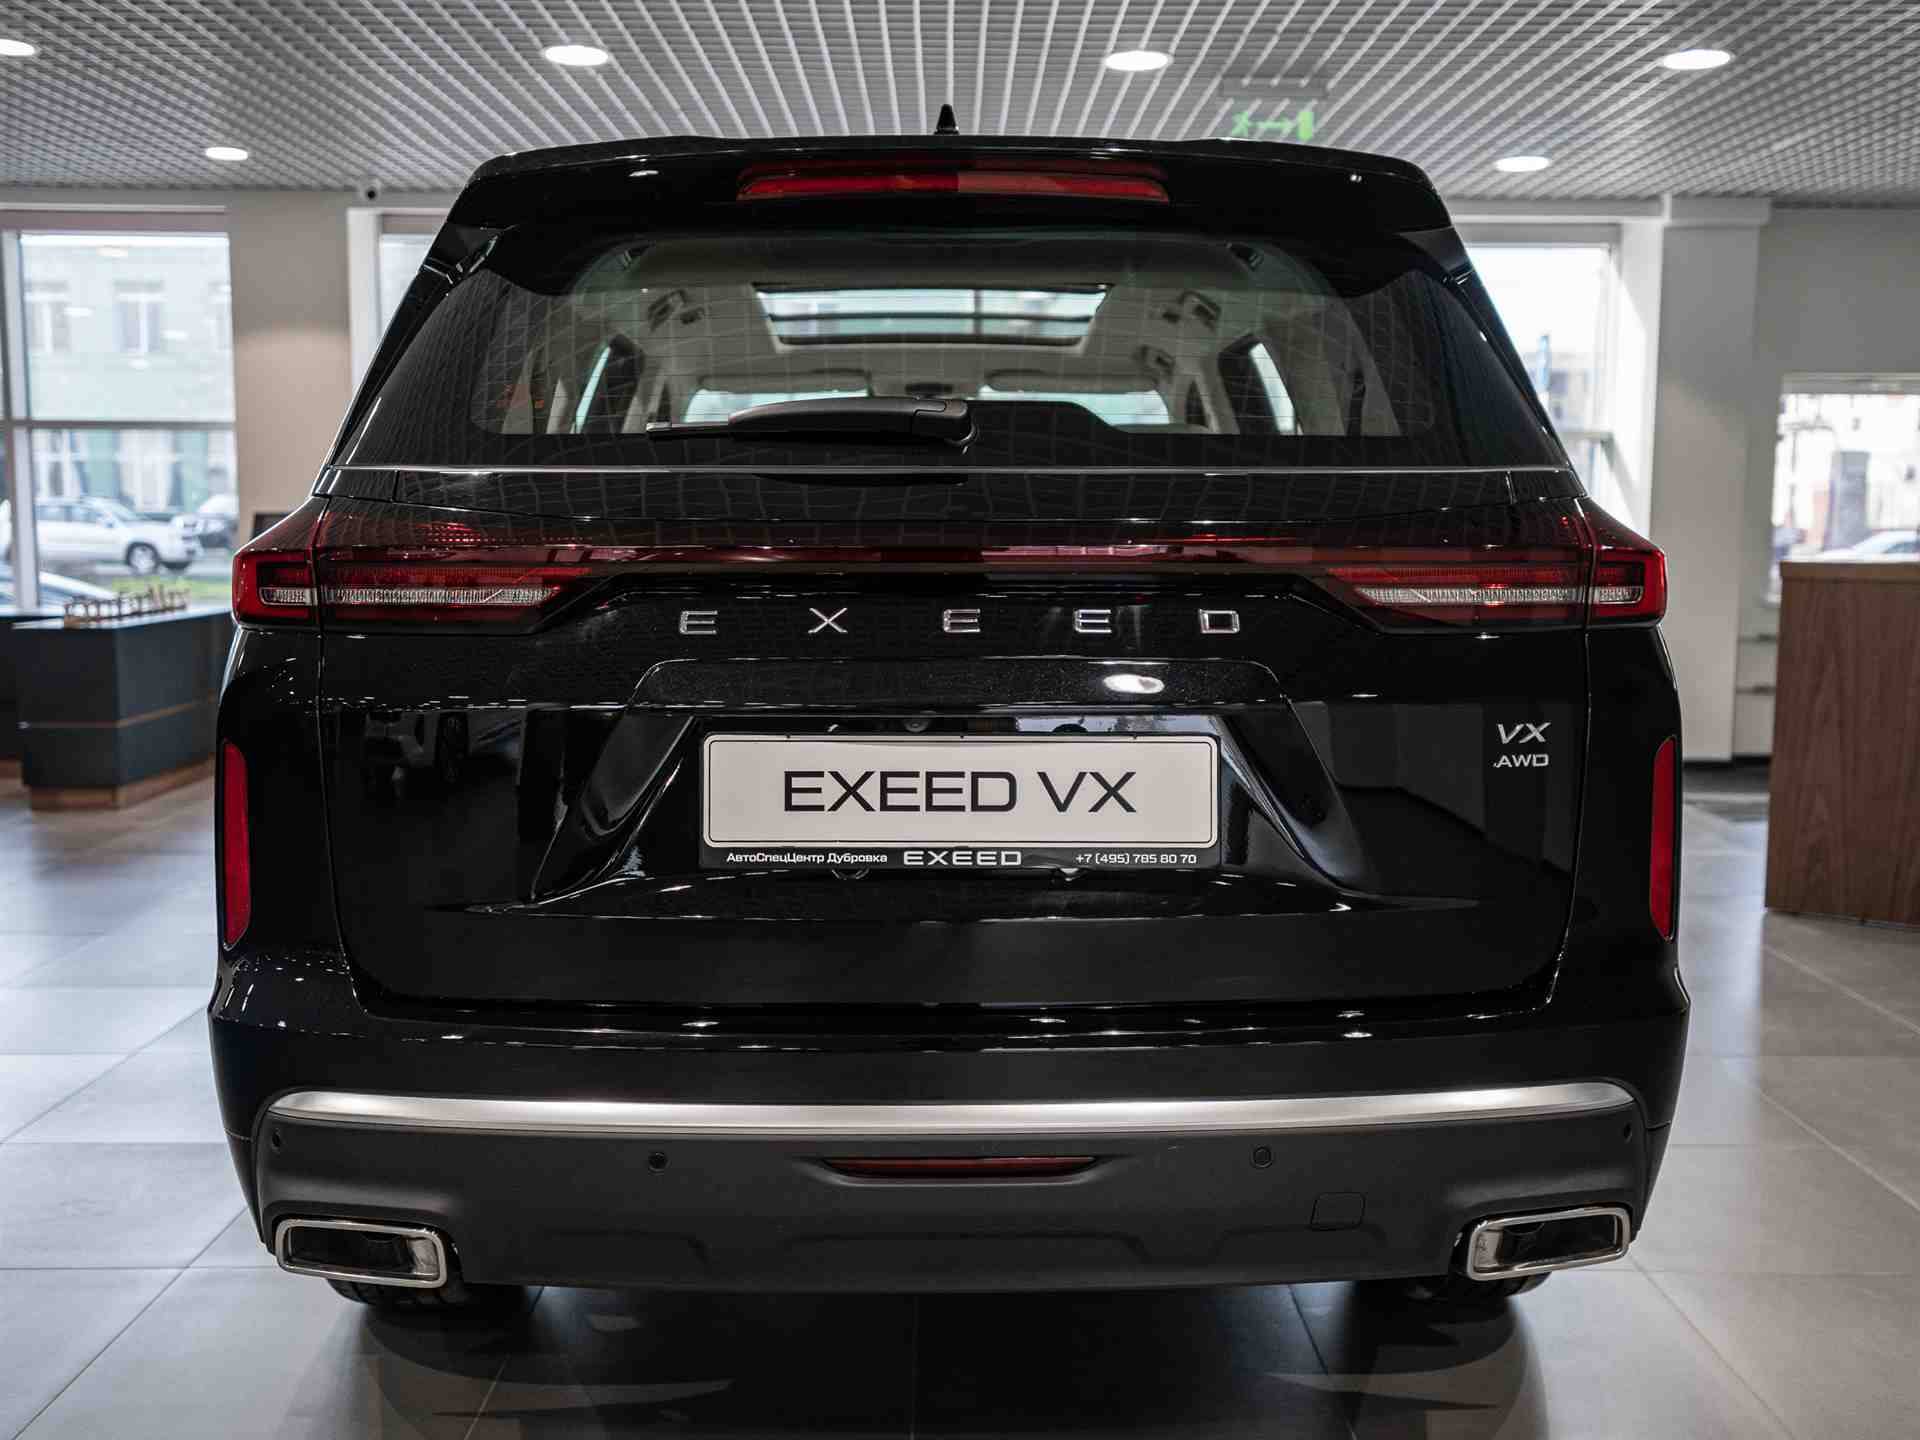 EXEED VX President 2.0T 7DCT 4WD